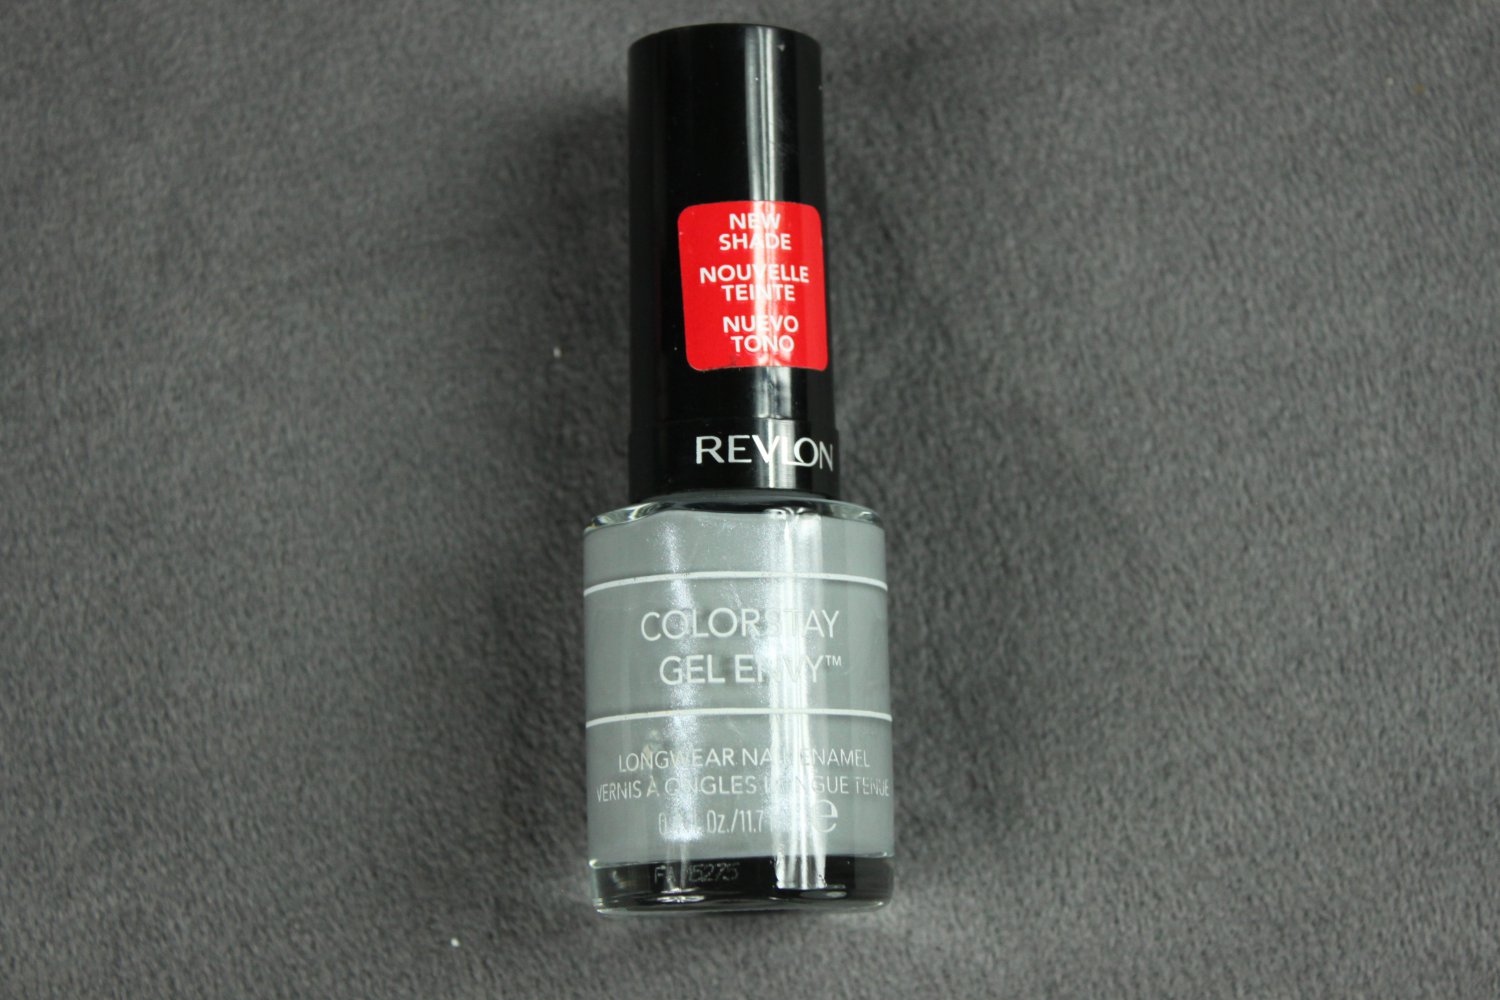 VKATZ reviews Revlon Color stay gel envy nail enamel so that you keep  perfectly manicured.